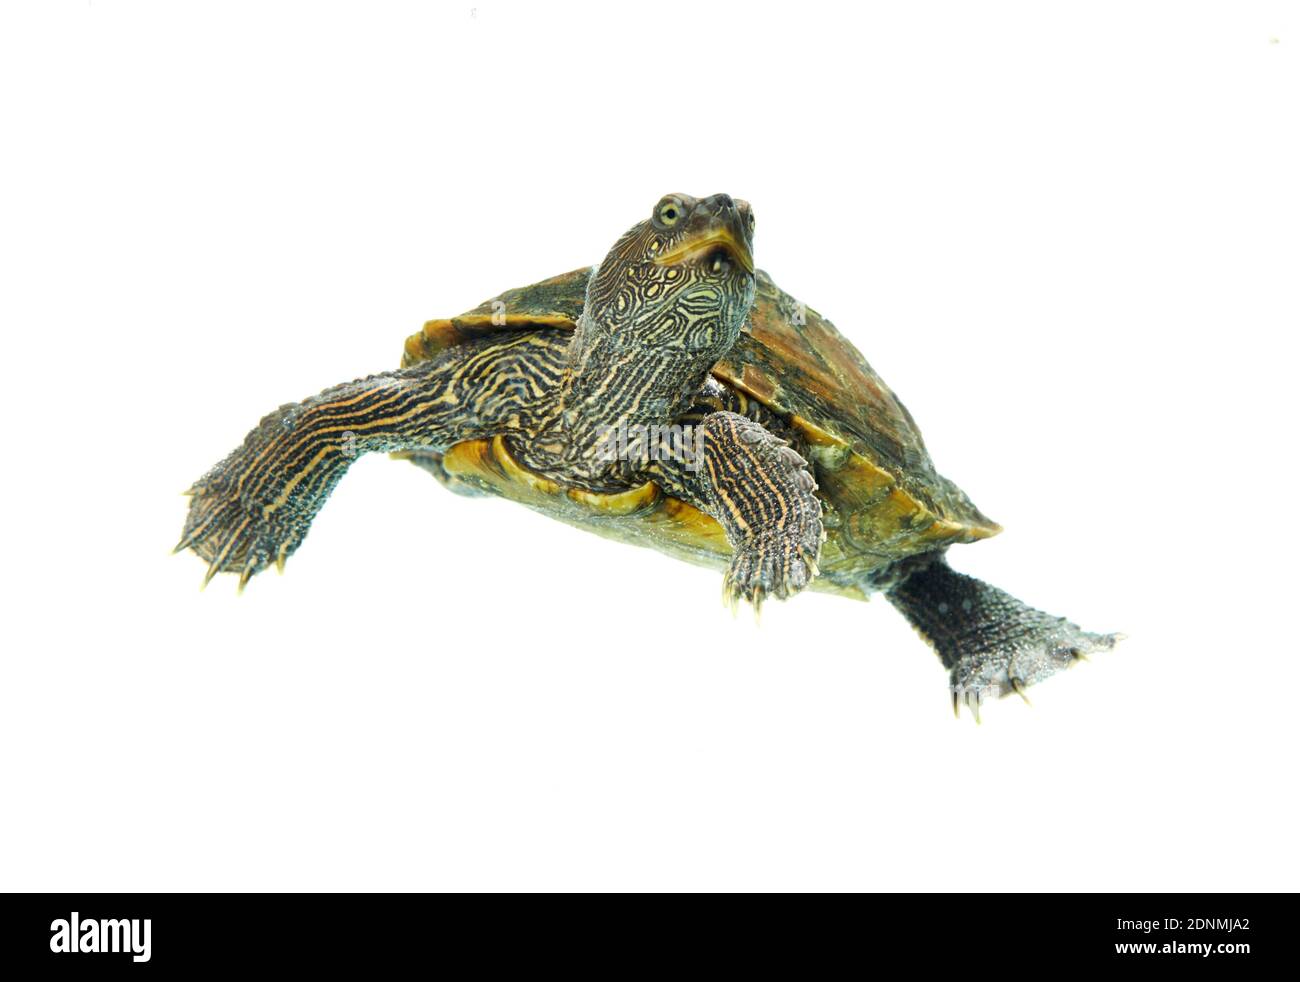 Adult False Map Turtle (Graptemys pseudogeographica). Studio picture against a white background Stock Photo